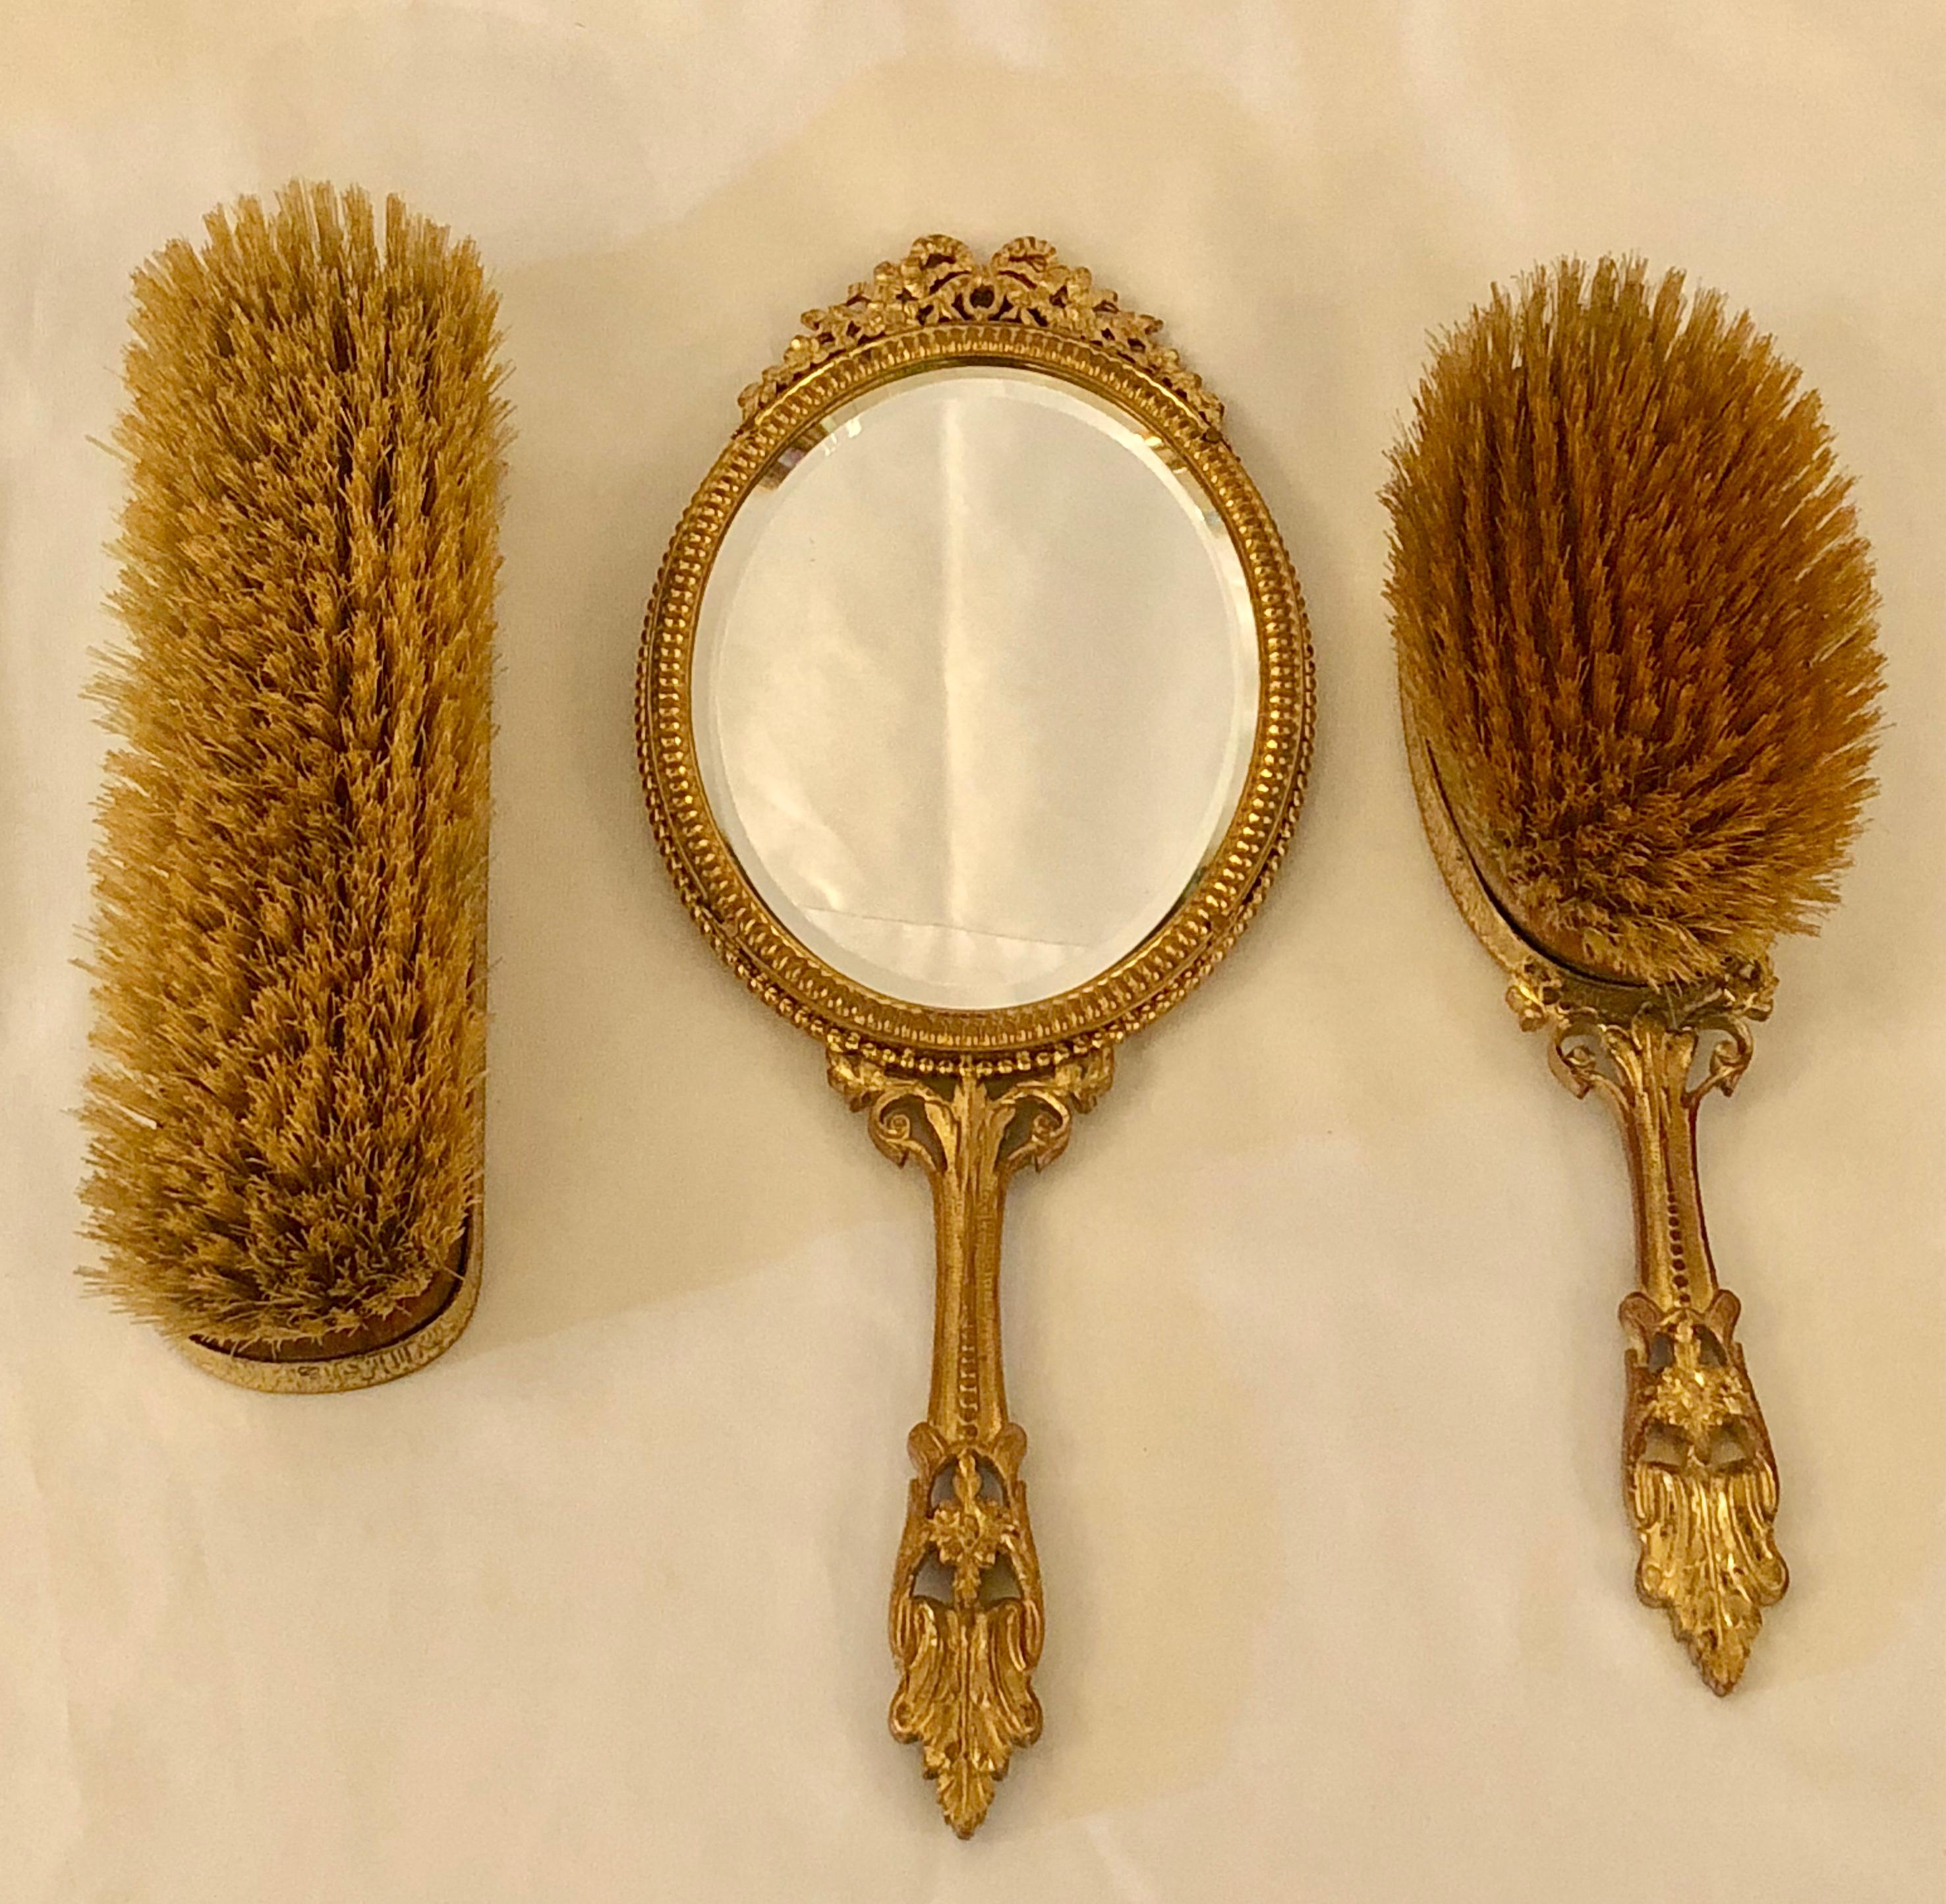 This lovely 19th century dresser set consists of two brushes and a mirror. The nice shade of lavender enamel is particularly appealing and feminine. Miniatures after Anatole Vely (1838-1882).